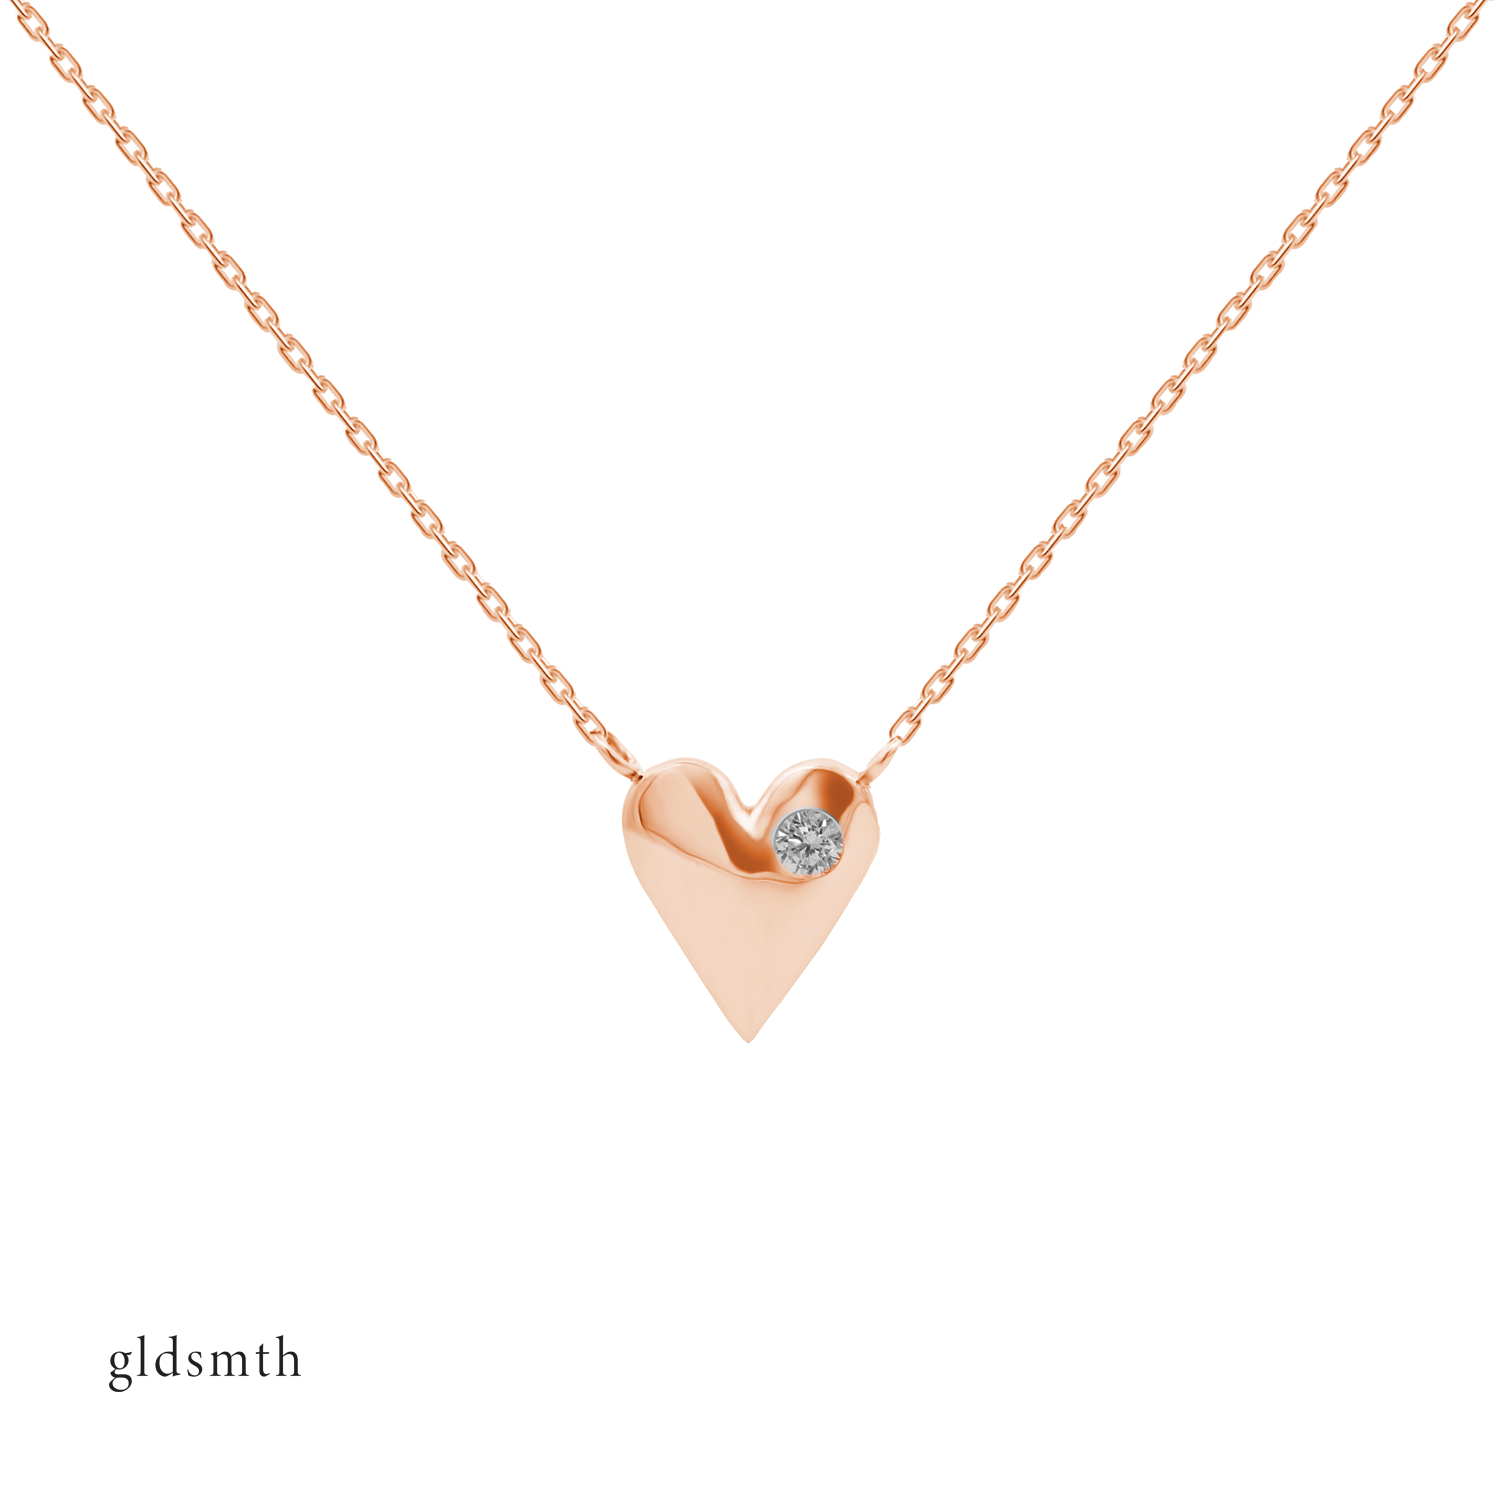 Elegant and fine handcrafted 10k solid rose gold necklace with conflict-free diamonds.